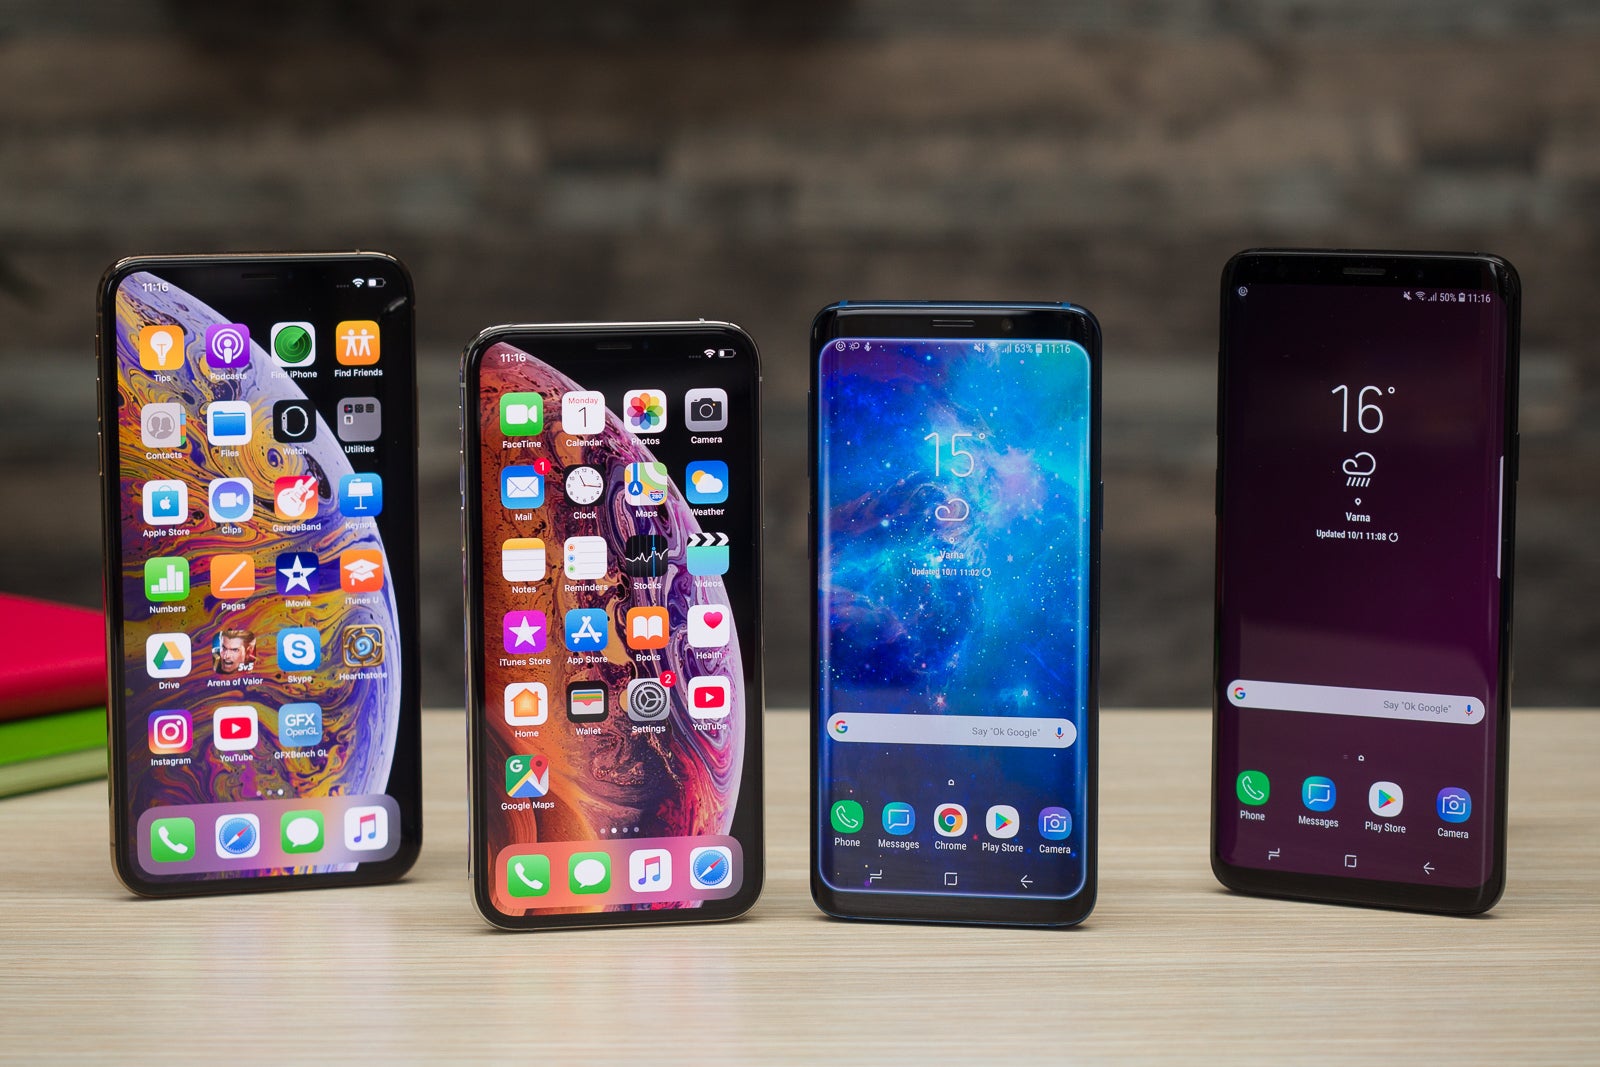 Why do all smartphones look the same?